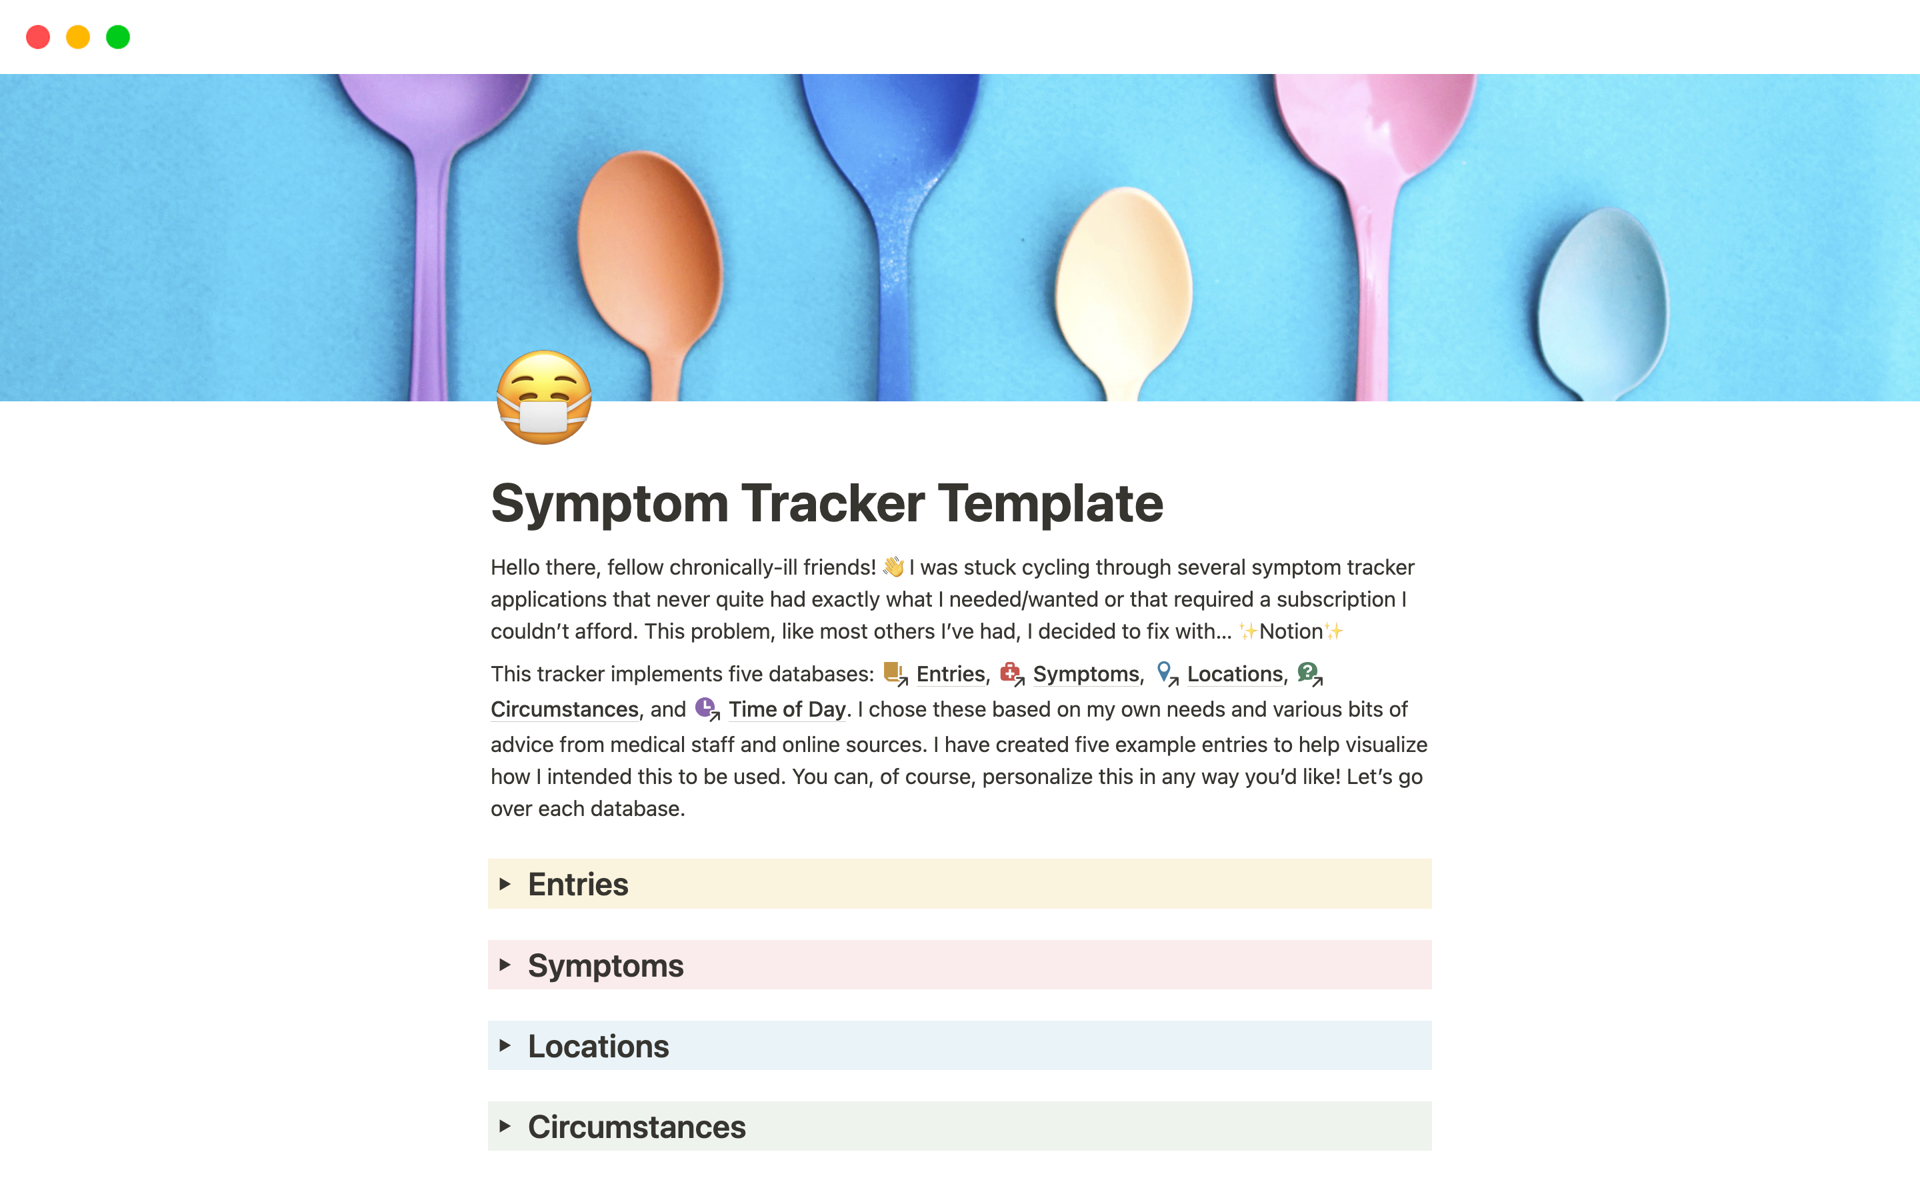 In-depth symptom tracker - new items to be added soon!